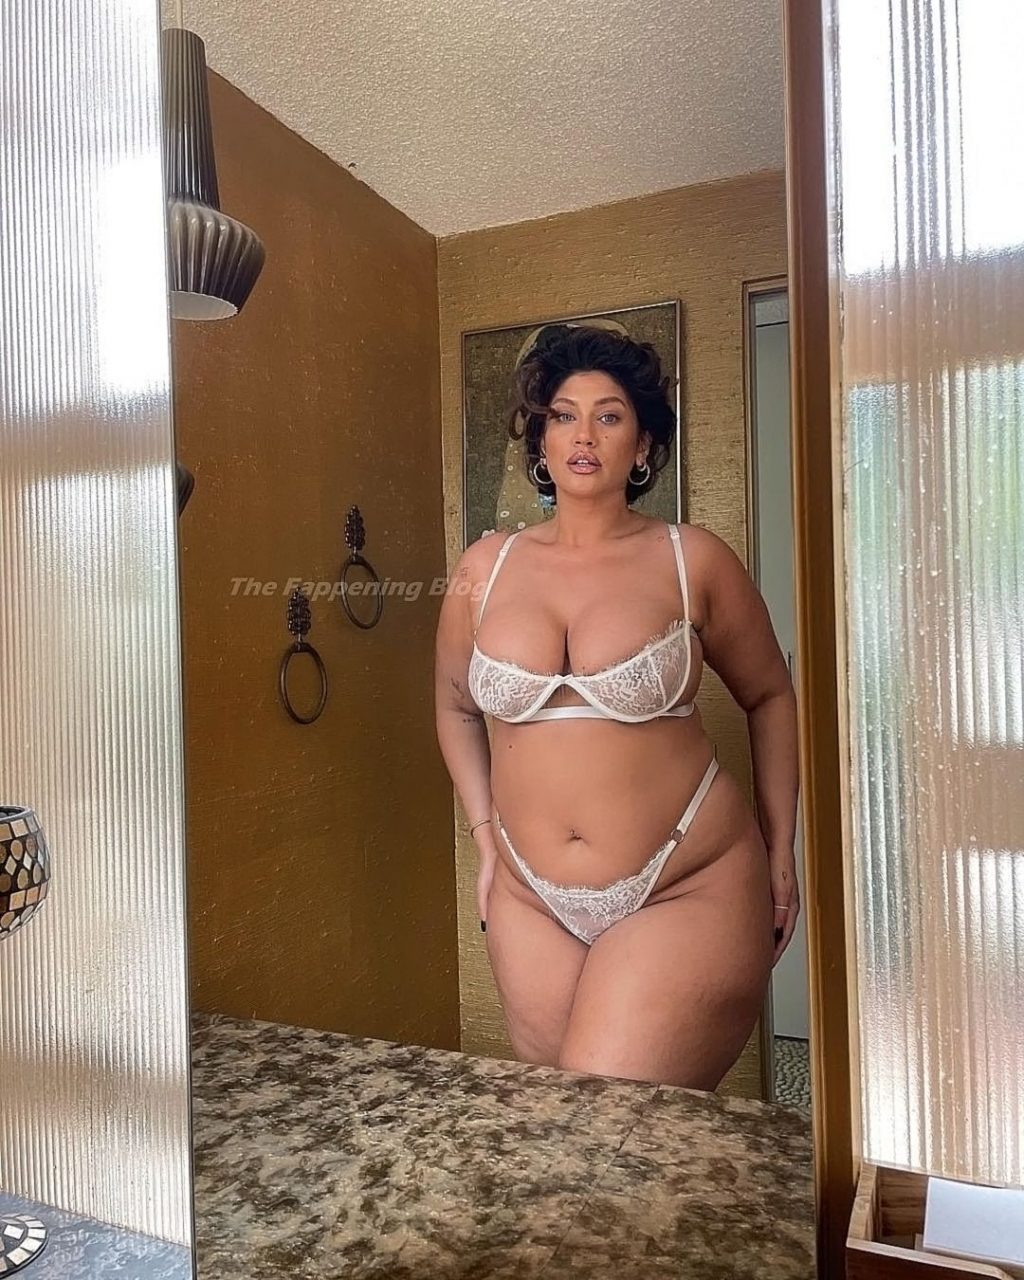 Check out La’Tecia Thomas’s slightly nude and topless photos from Instagram...